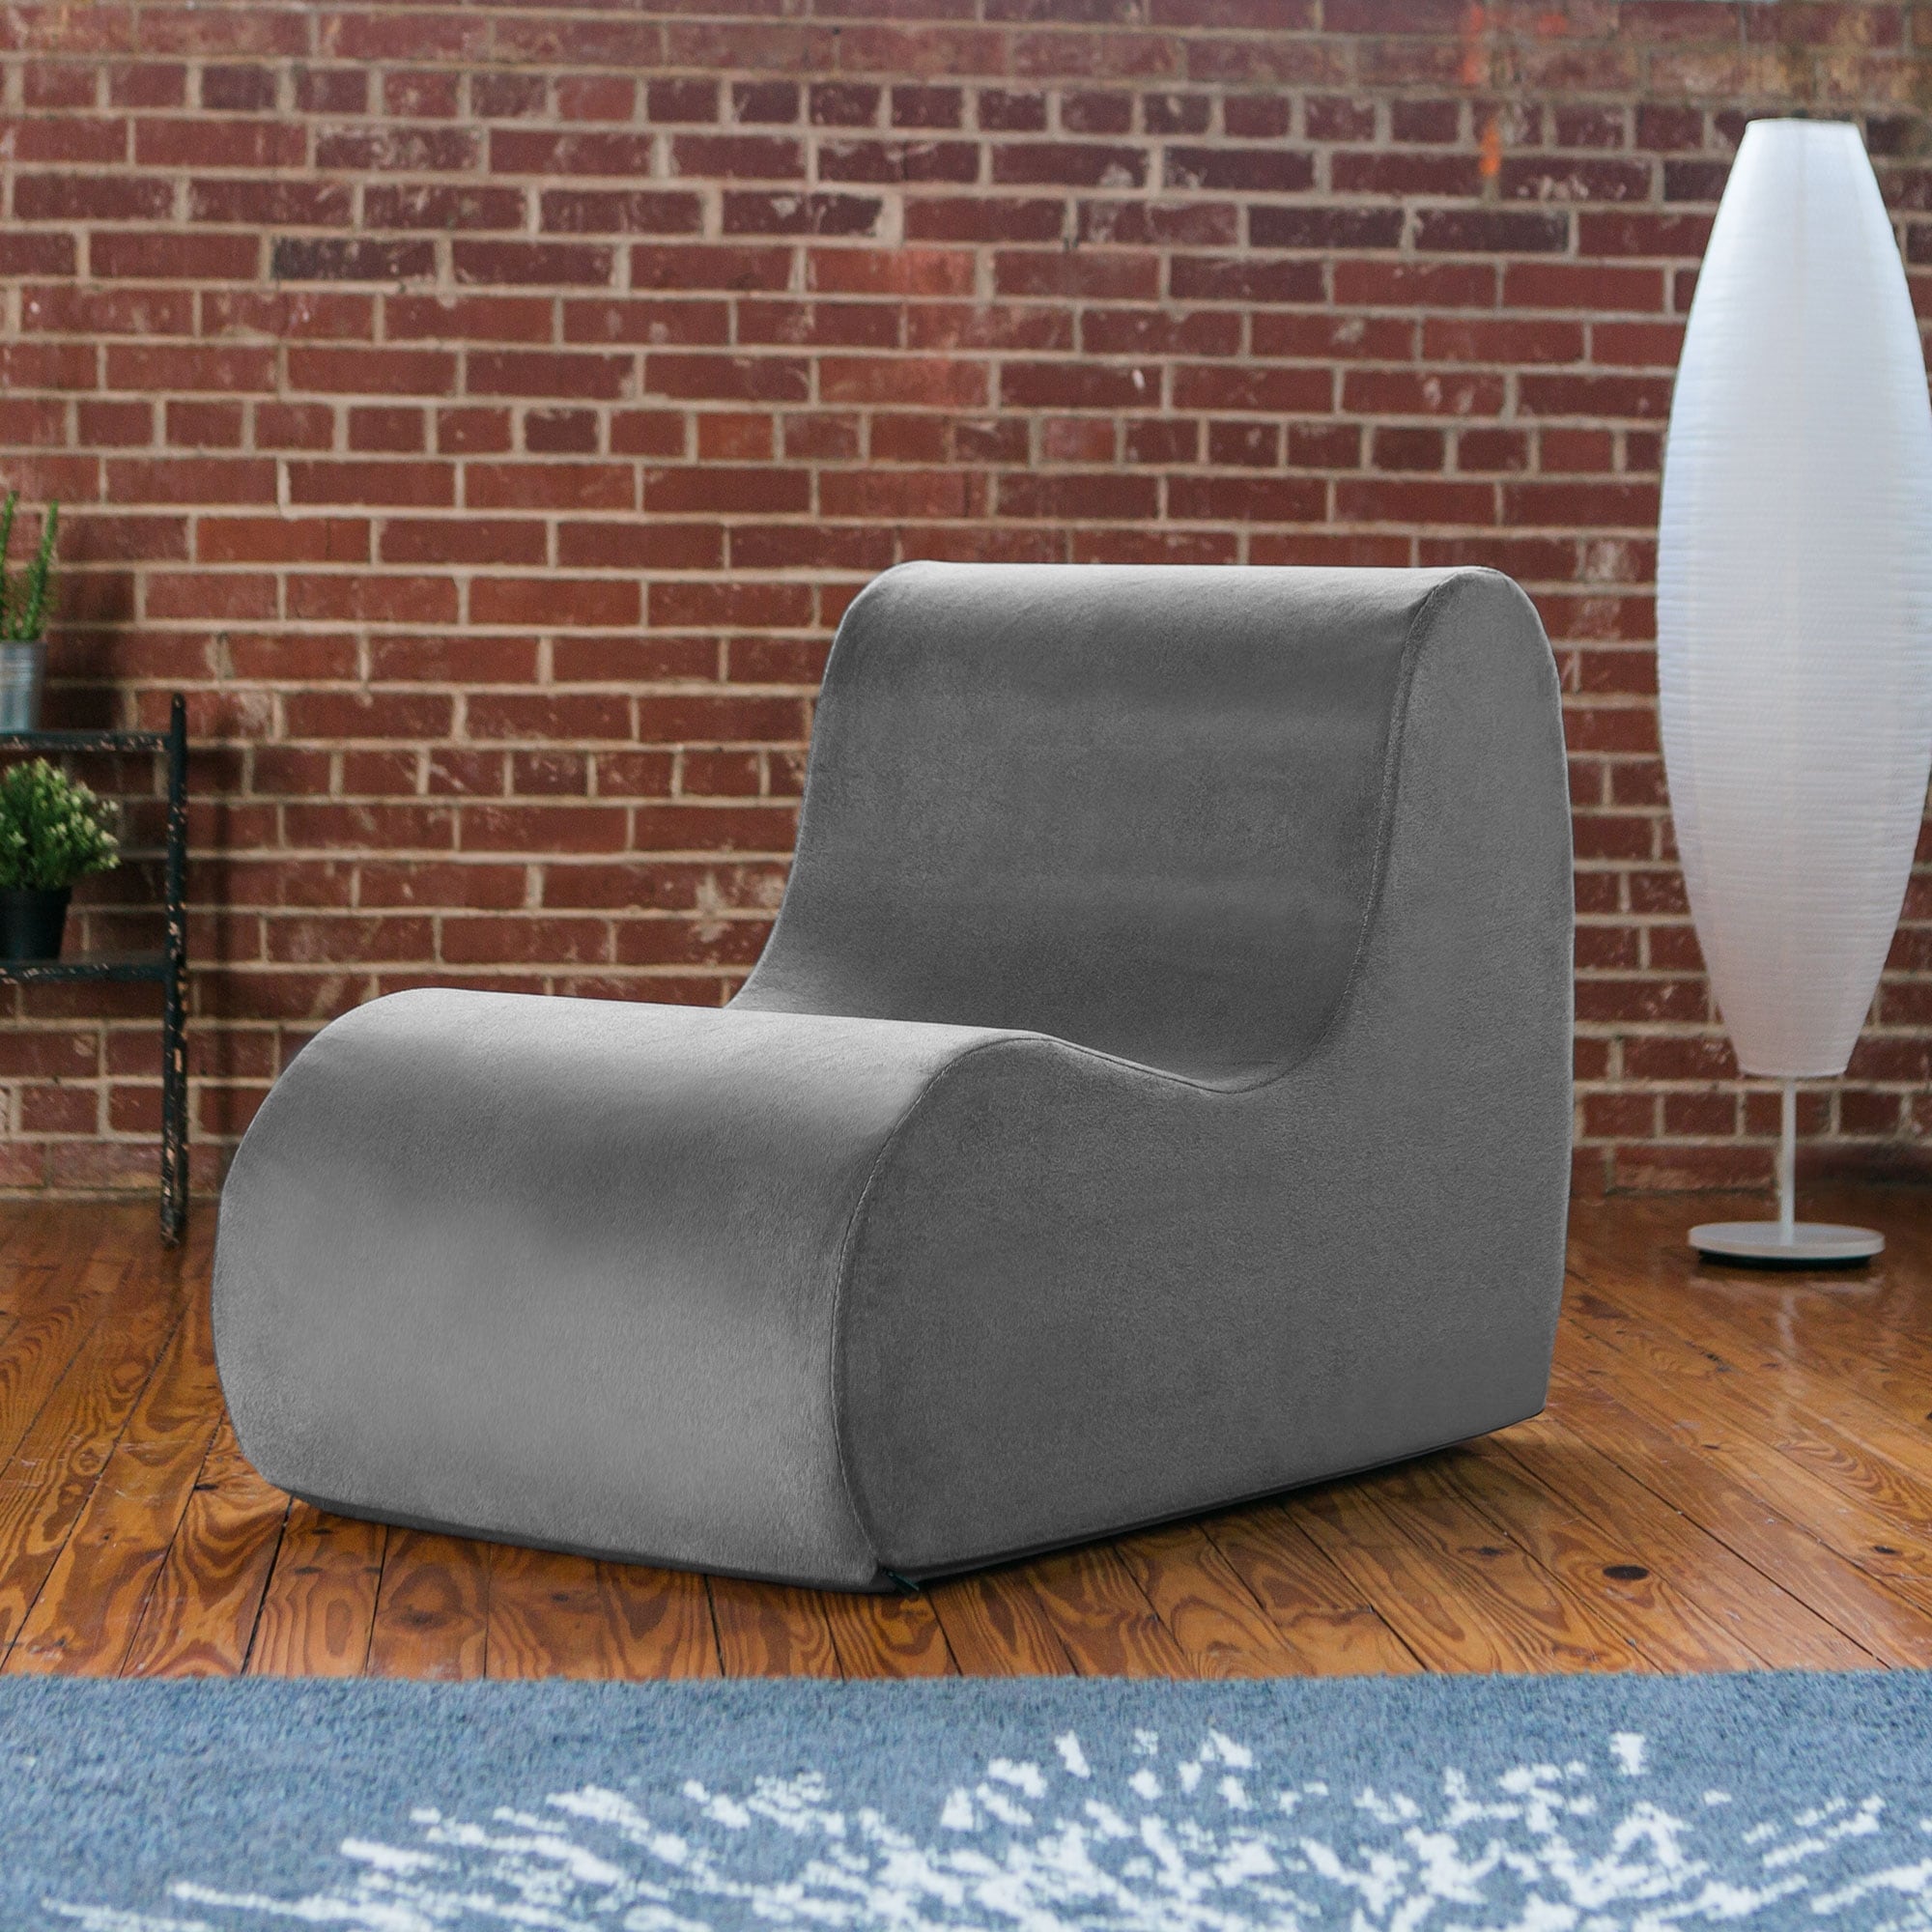 Midtown Soft Foam Chair - Large by Jaxx, Outdoor Furniture